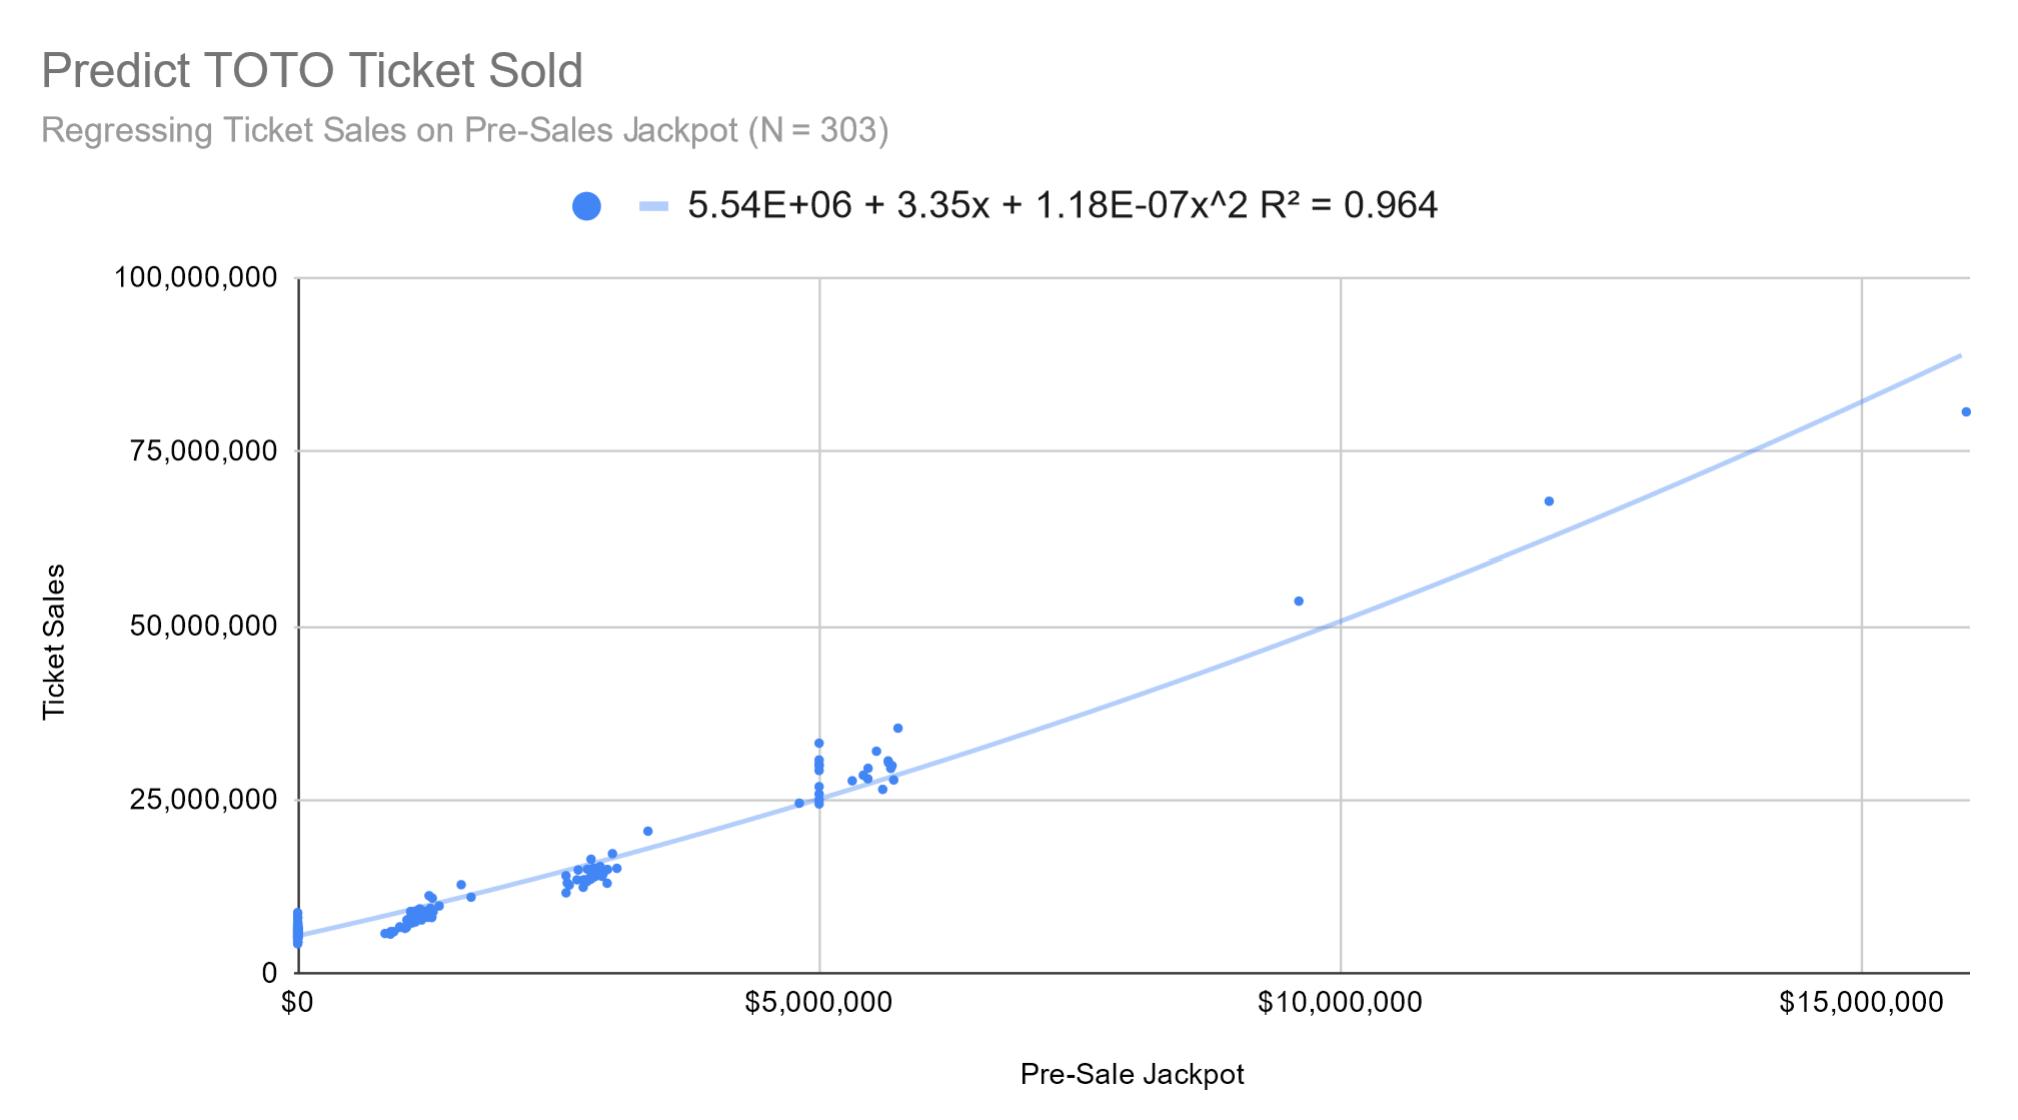 Figure 2: TOTO Ticket Sold as a Quadratic Function of Jackpot